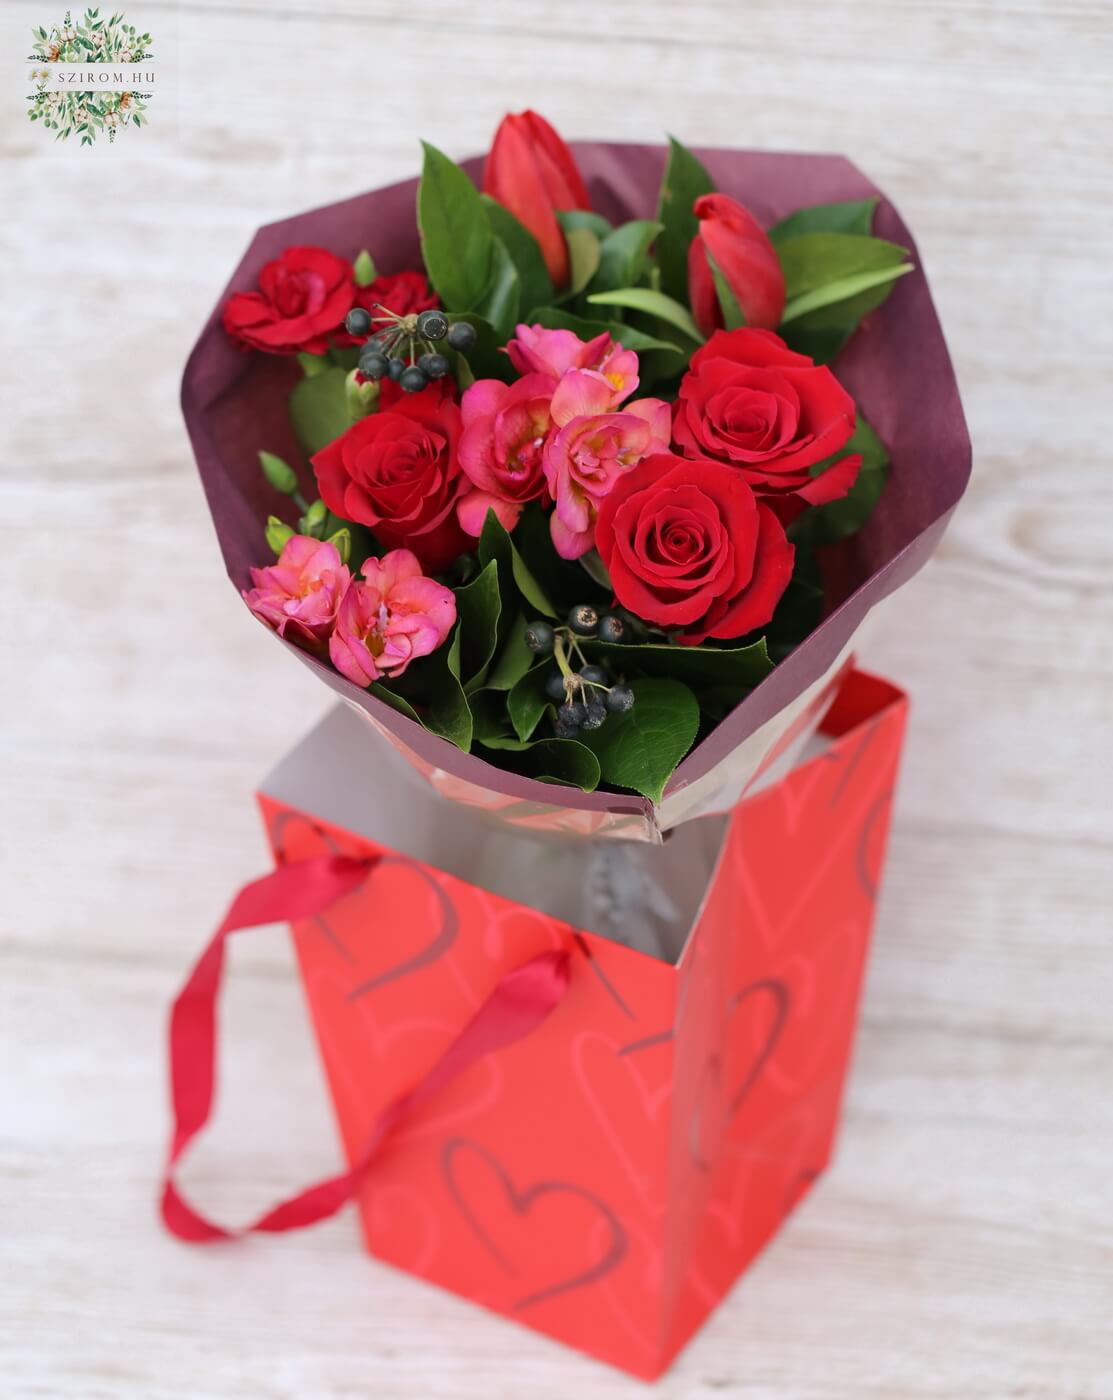 flower delivery Budapest - Small round bouquet with red roses, tulips, freesias (8 stem) with aquapack bag